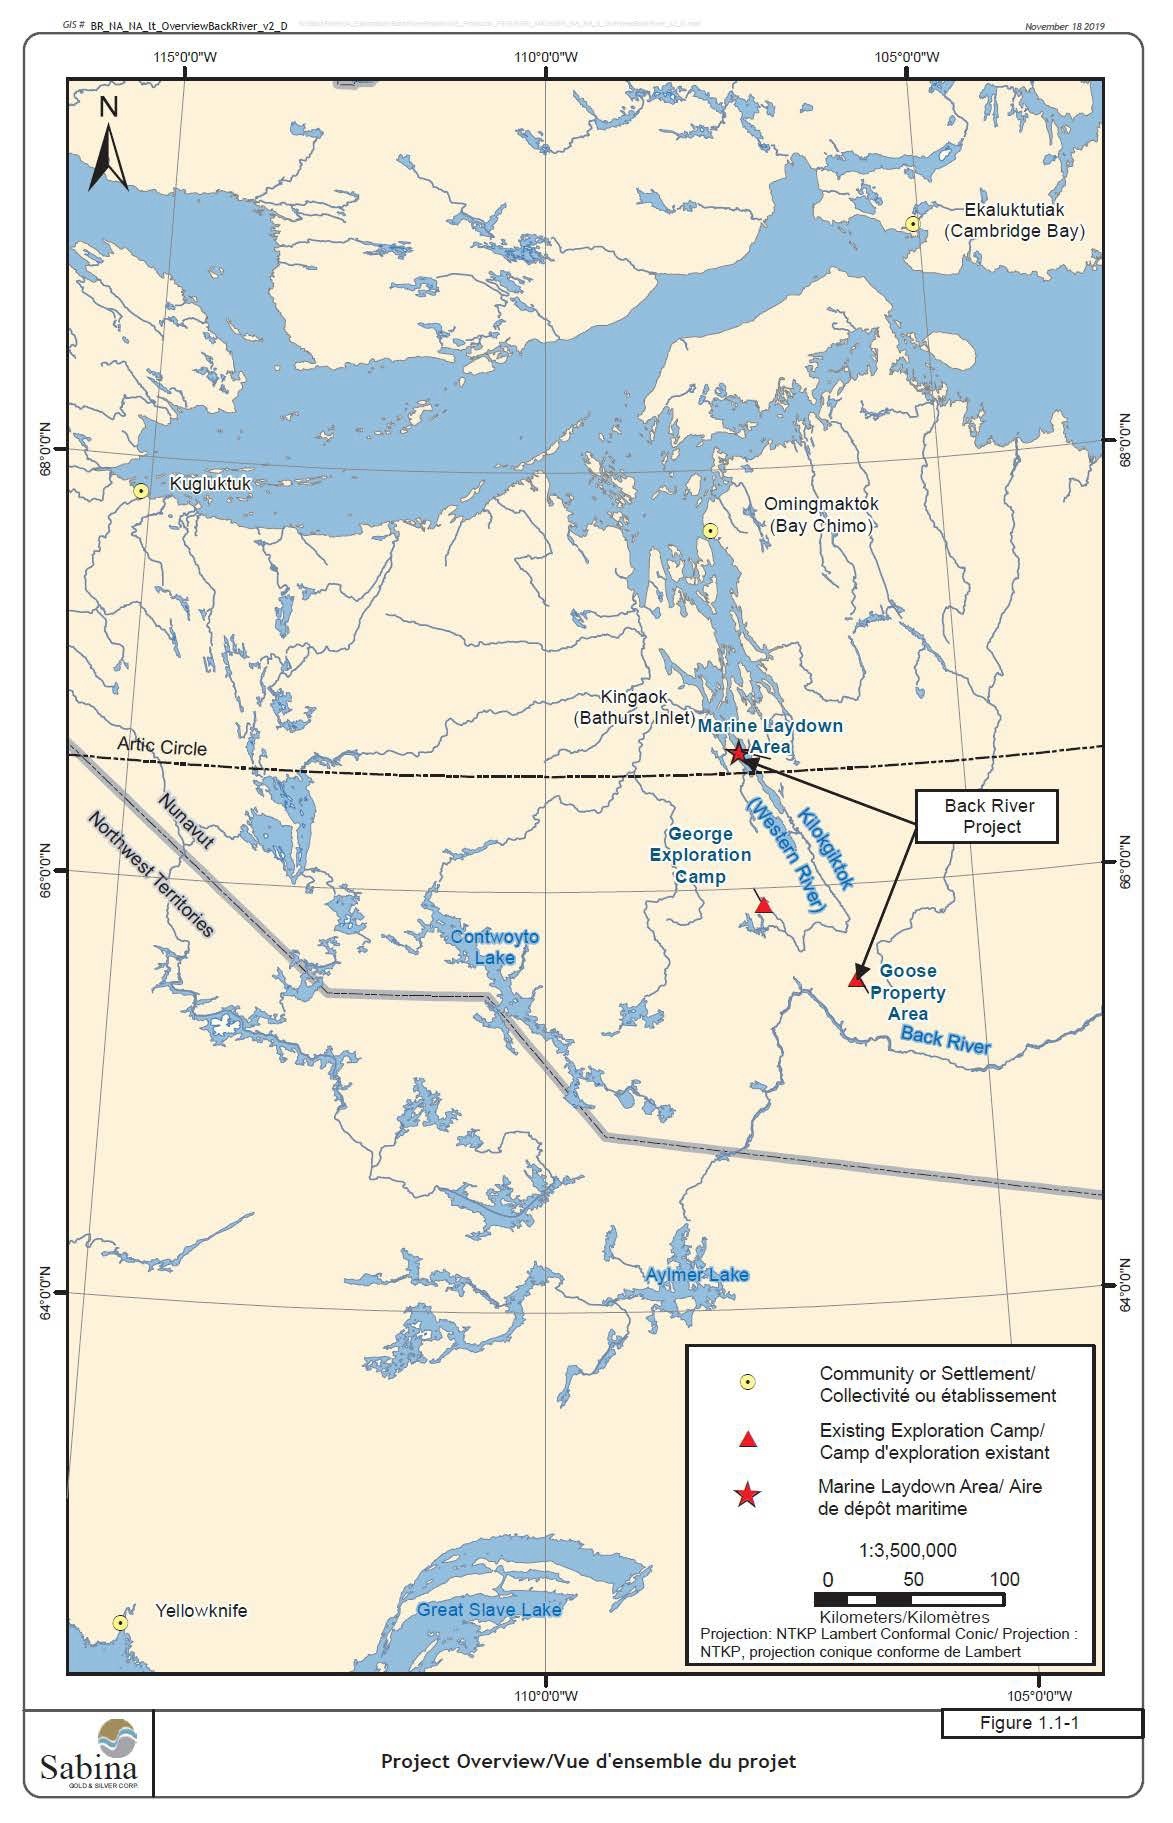 Figure 1 is a 1:3,500,000 scale map showing the general location of the Back River Mine Project in Nunavut. – Description below